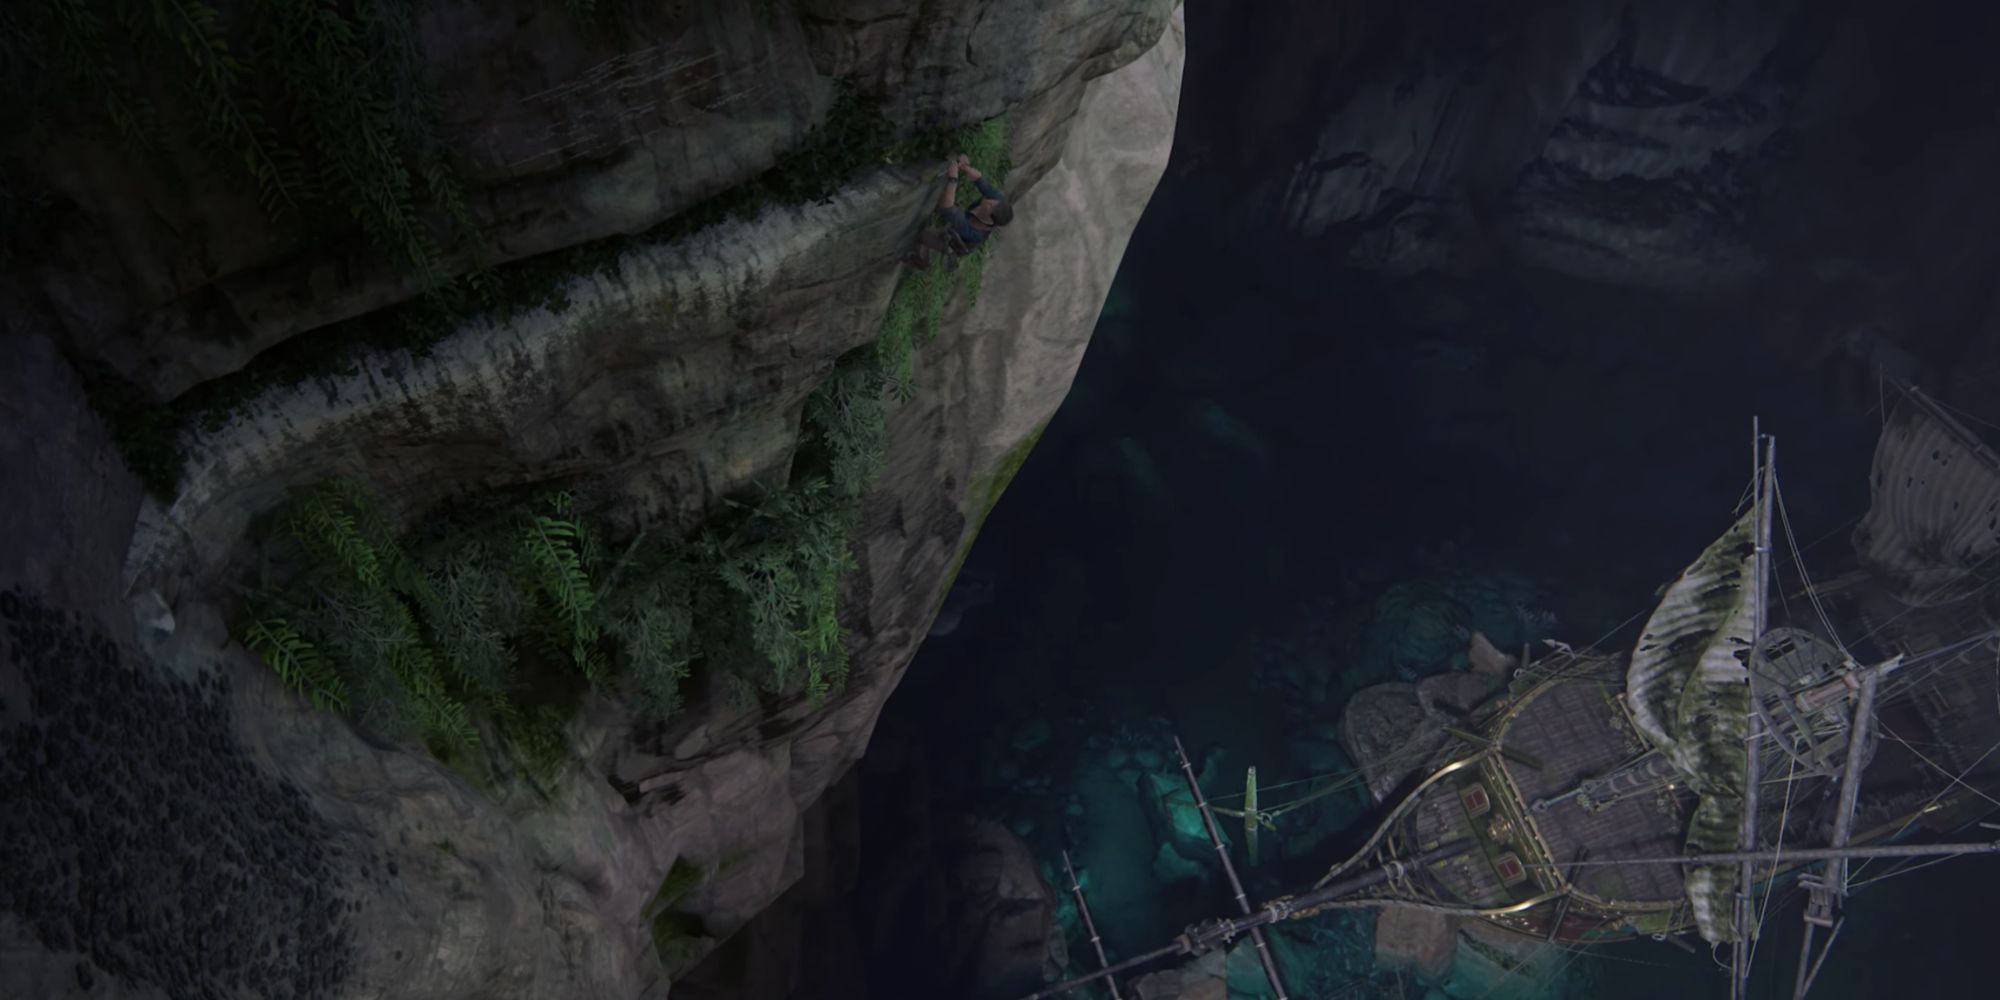 Nathan Drake climbing in a huge open cavern with Henry Avery's Shipwreck below in Uncharted 4: A Thief's End